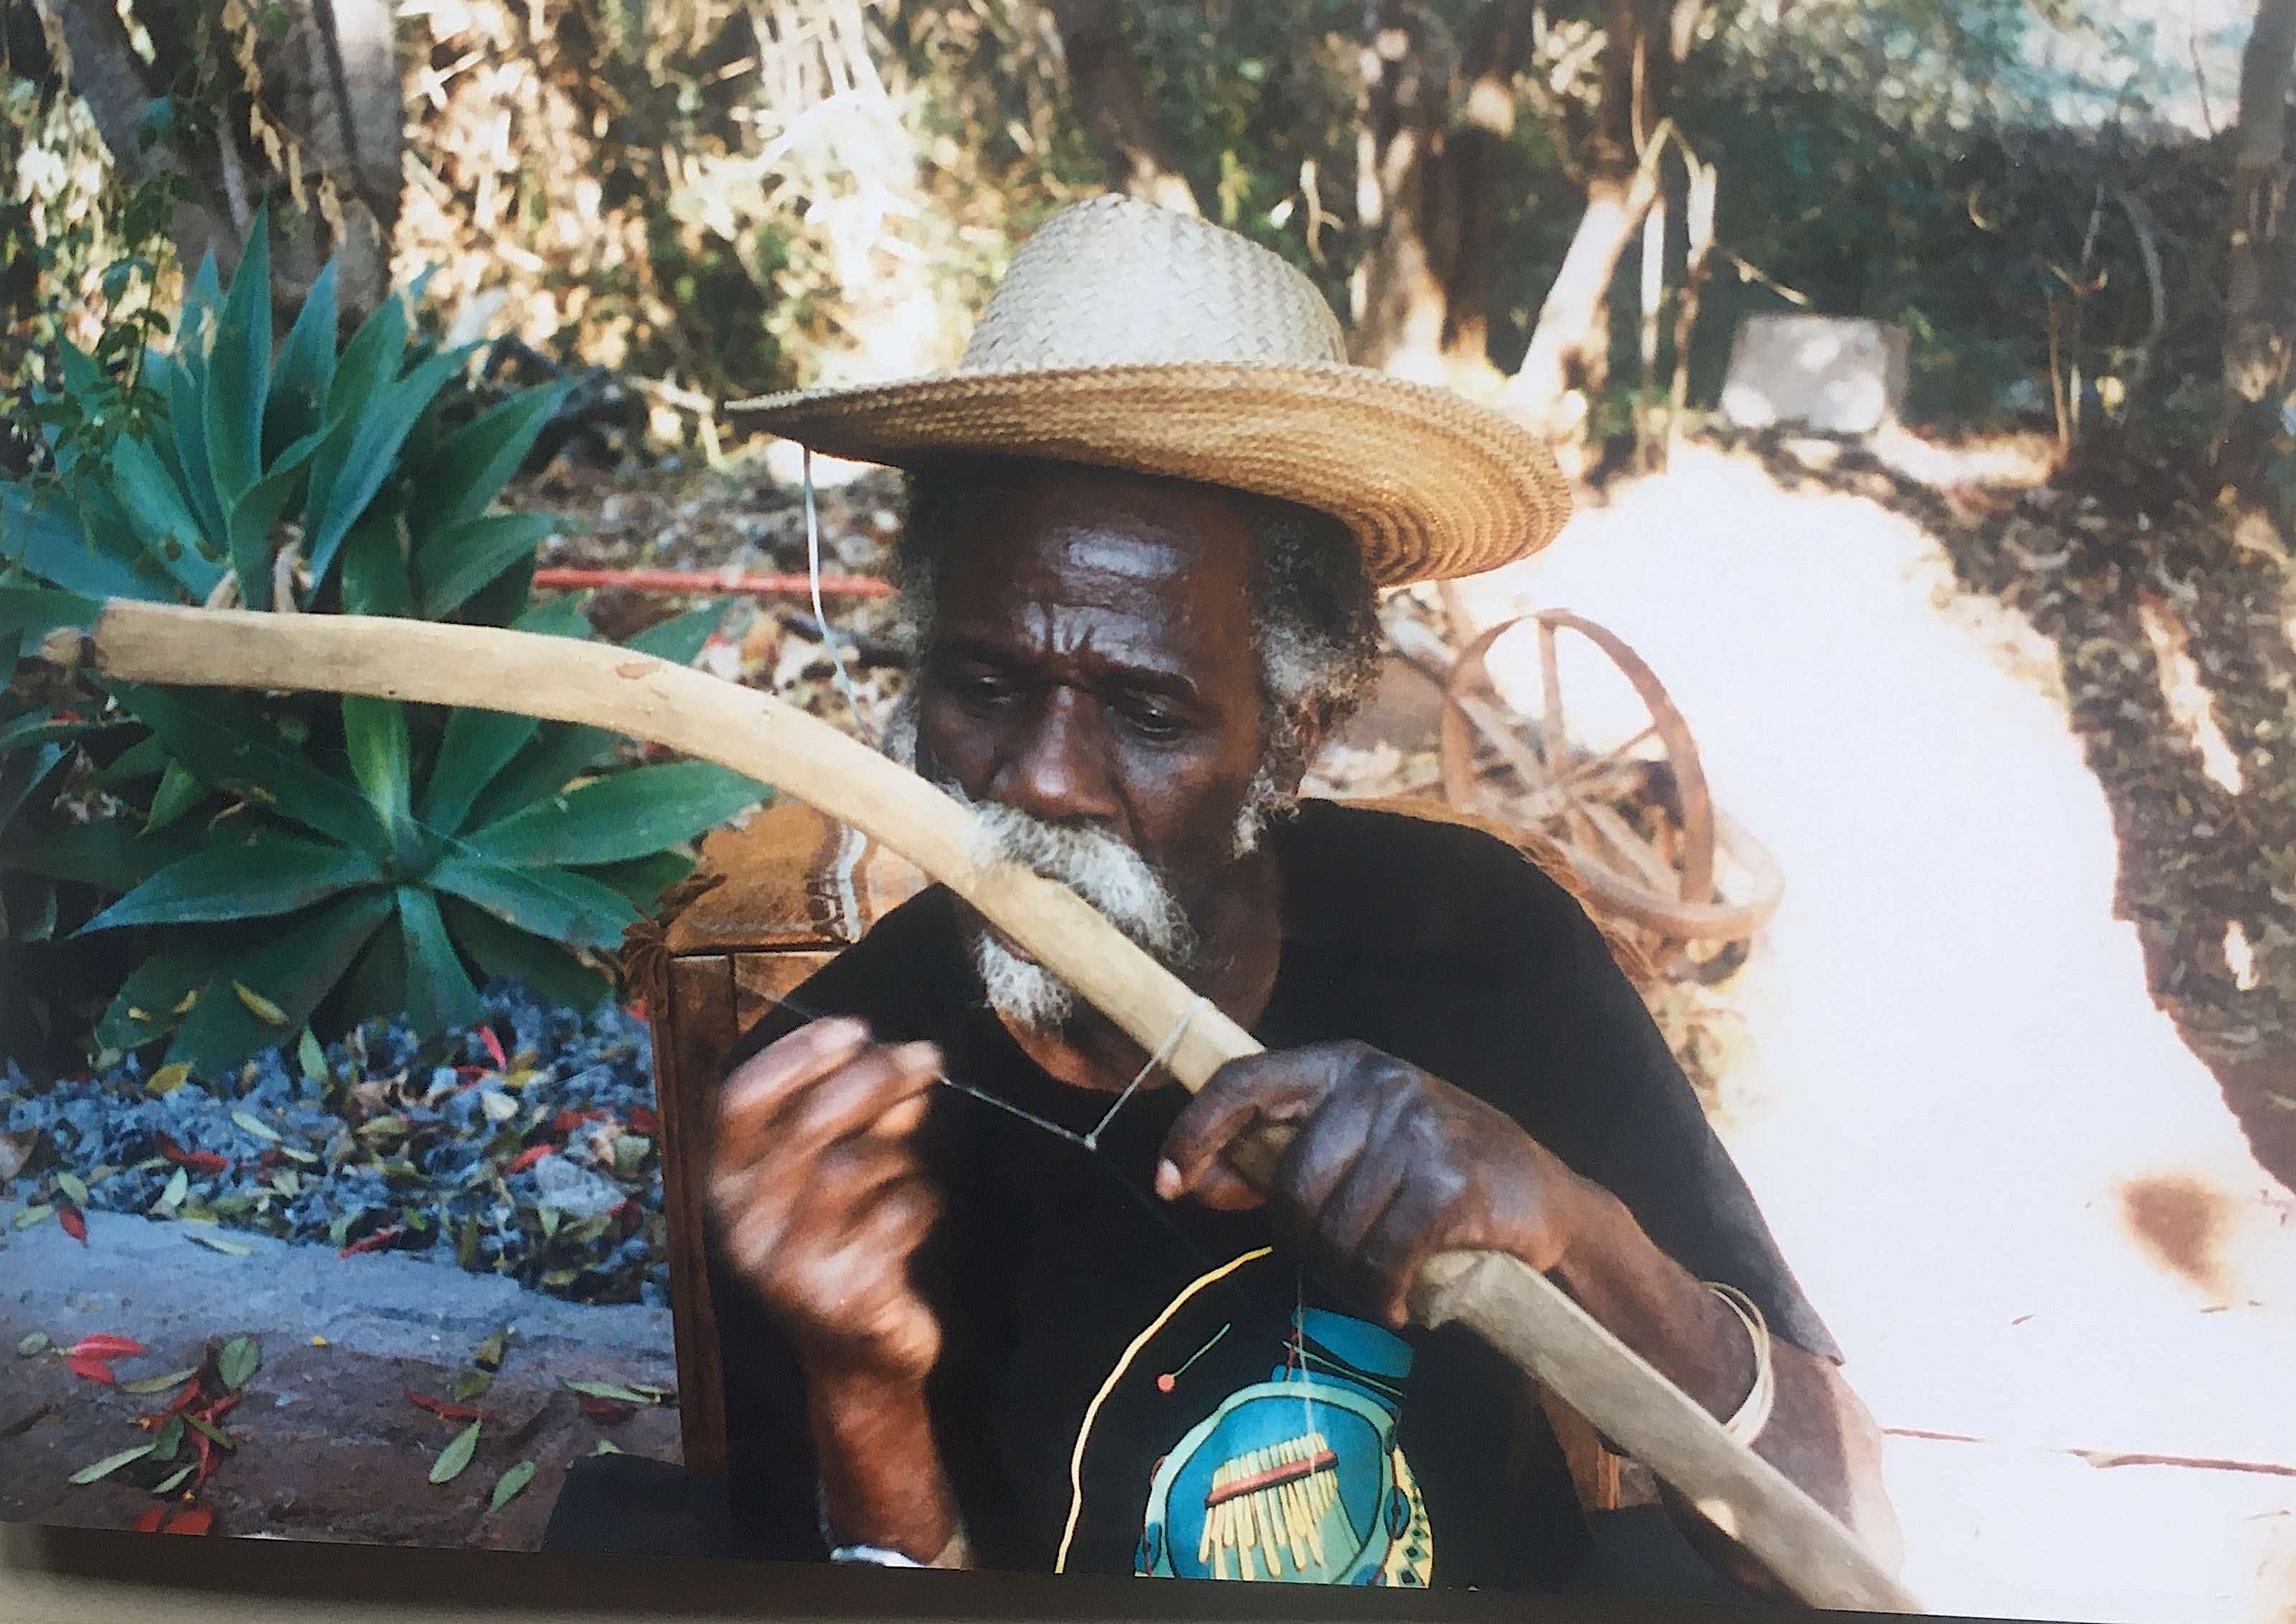 Frank Gombo musician playing ancient mouth bow the Chippendani in Zimbabwe. He was a baker and made his instruments. Frank was from Mozambique.